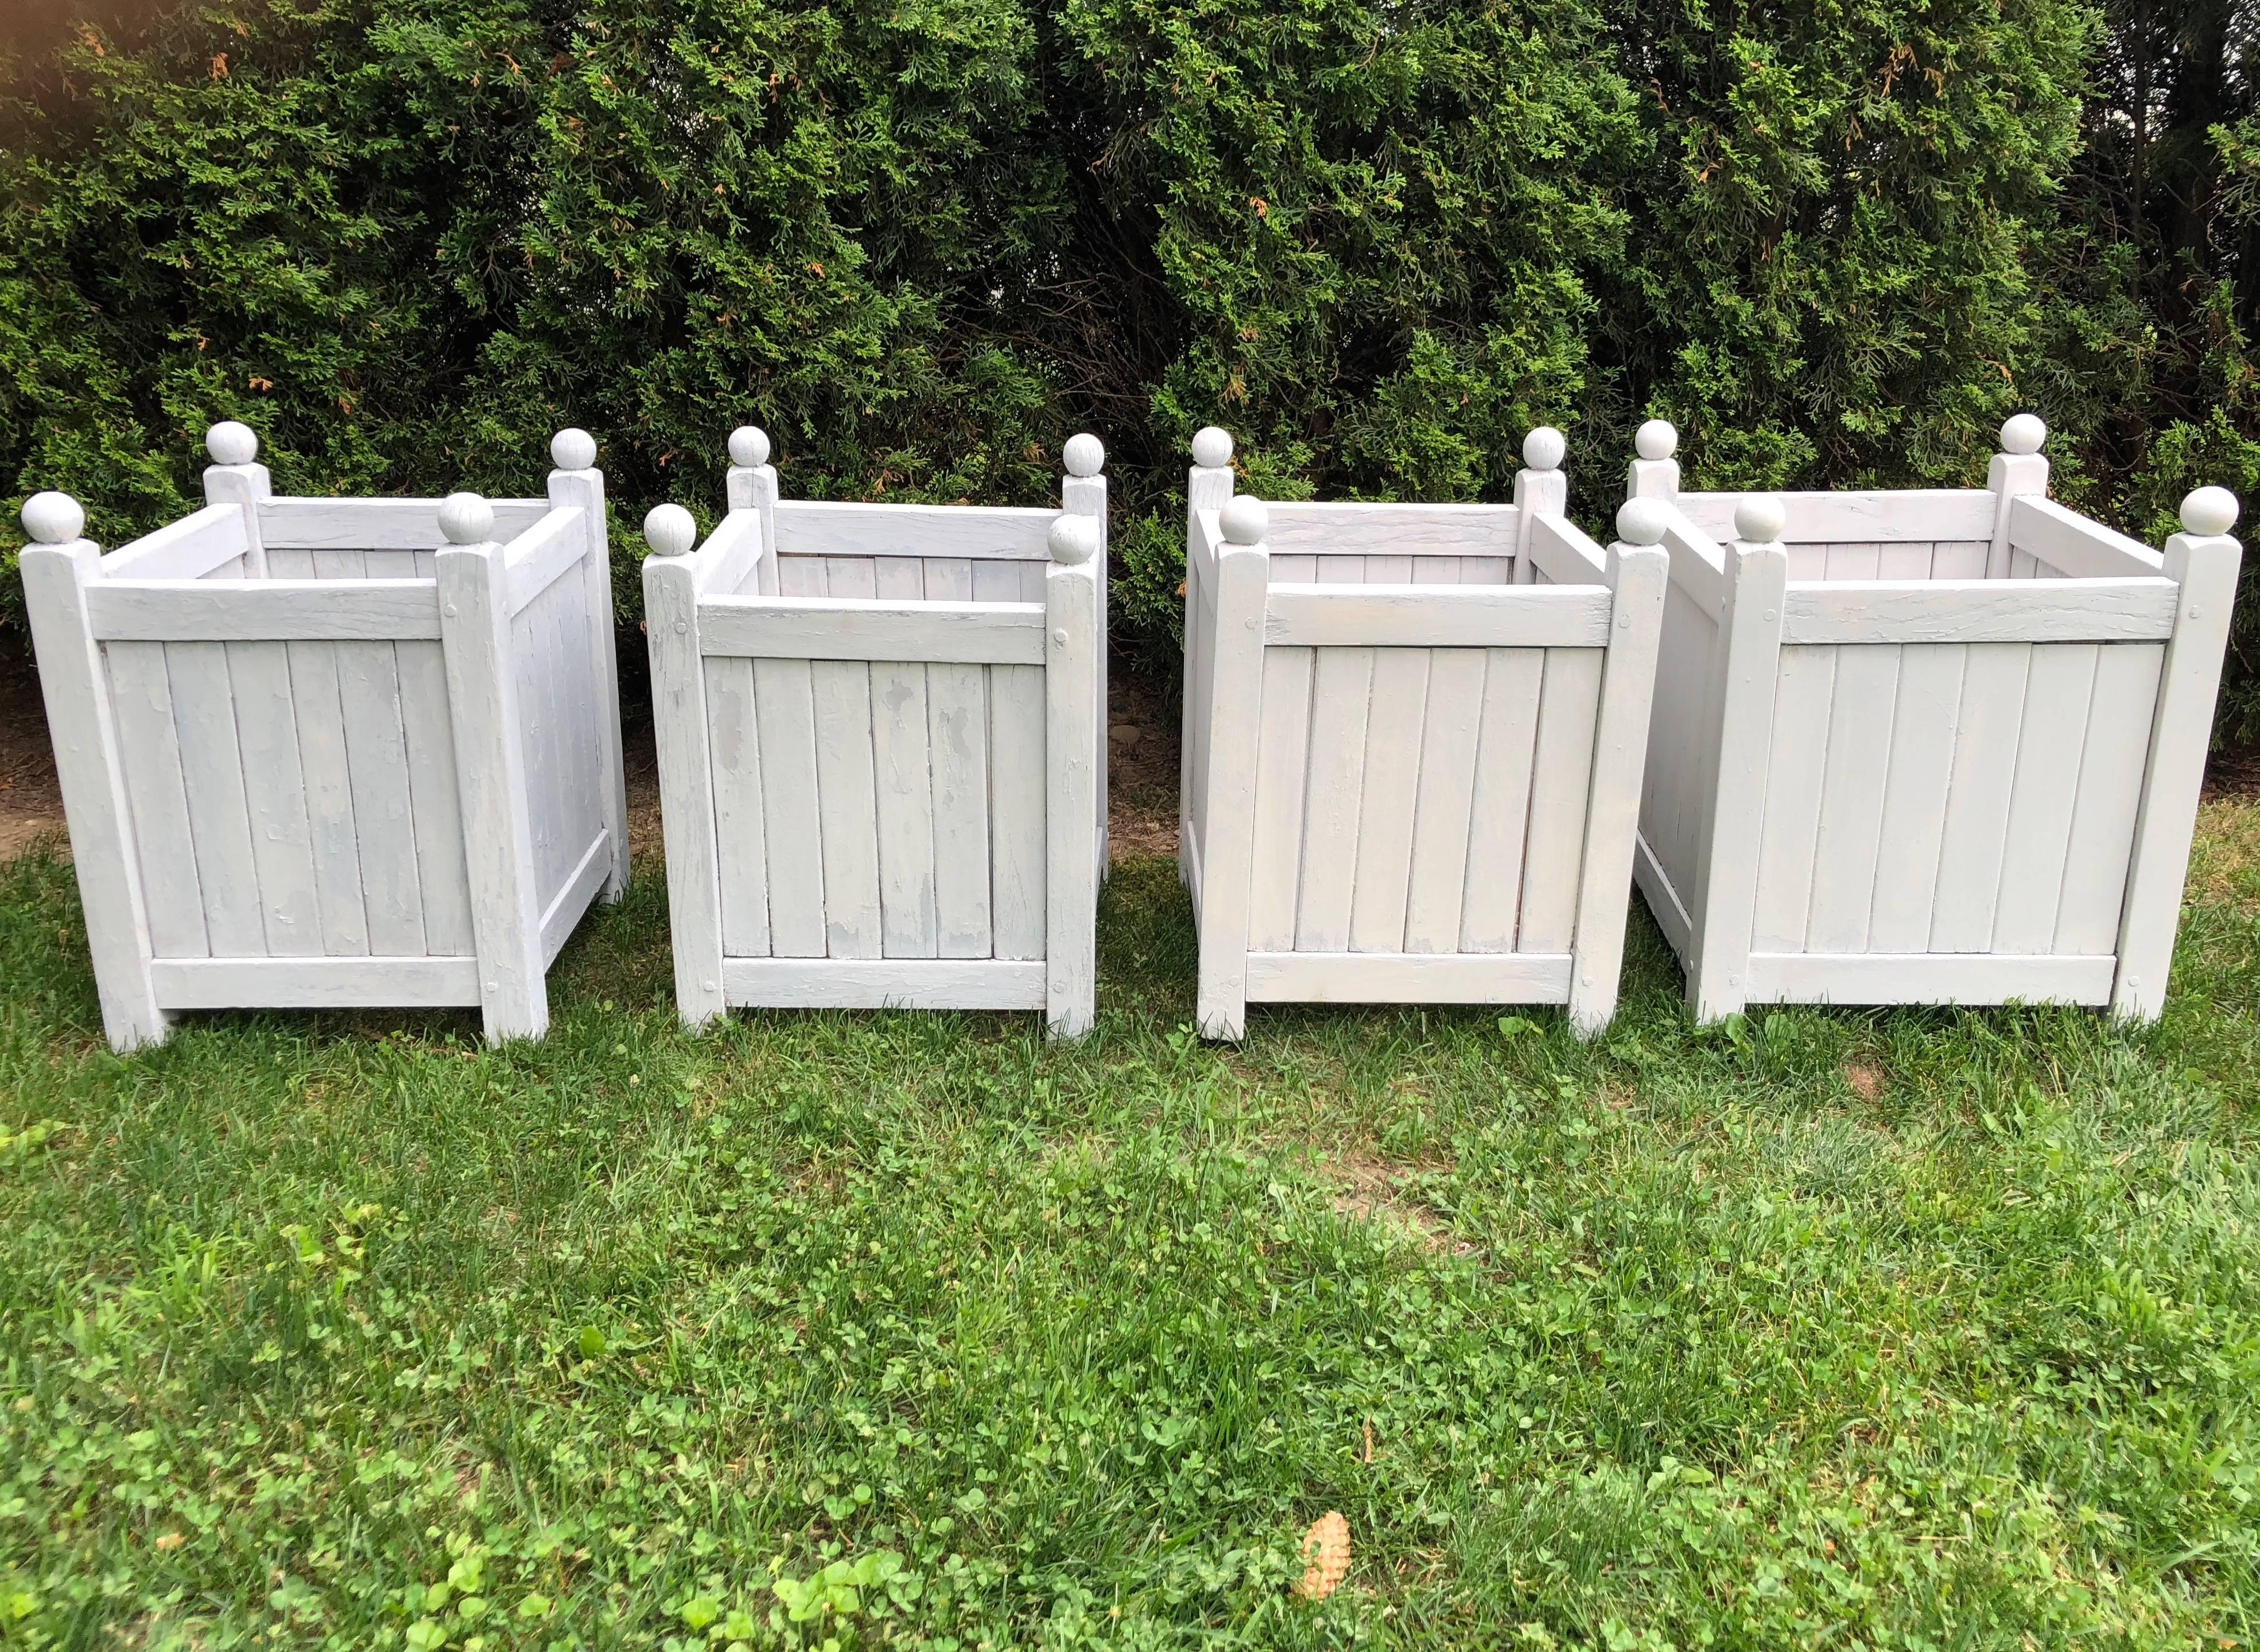 When we bought these in the rain, they had peeling paint and missing slats to the bottom and it was impossible to tell that they are actually two different sizes. However, they have since been restored and washed in a very pale grey paint and we